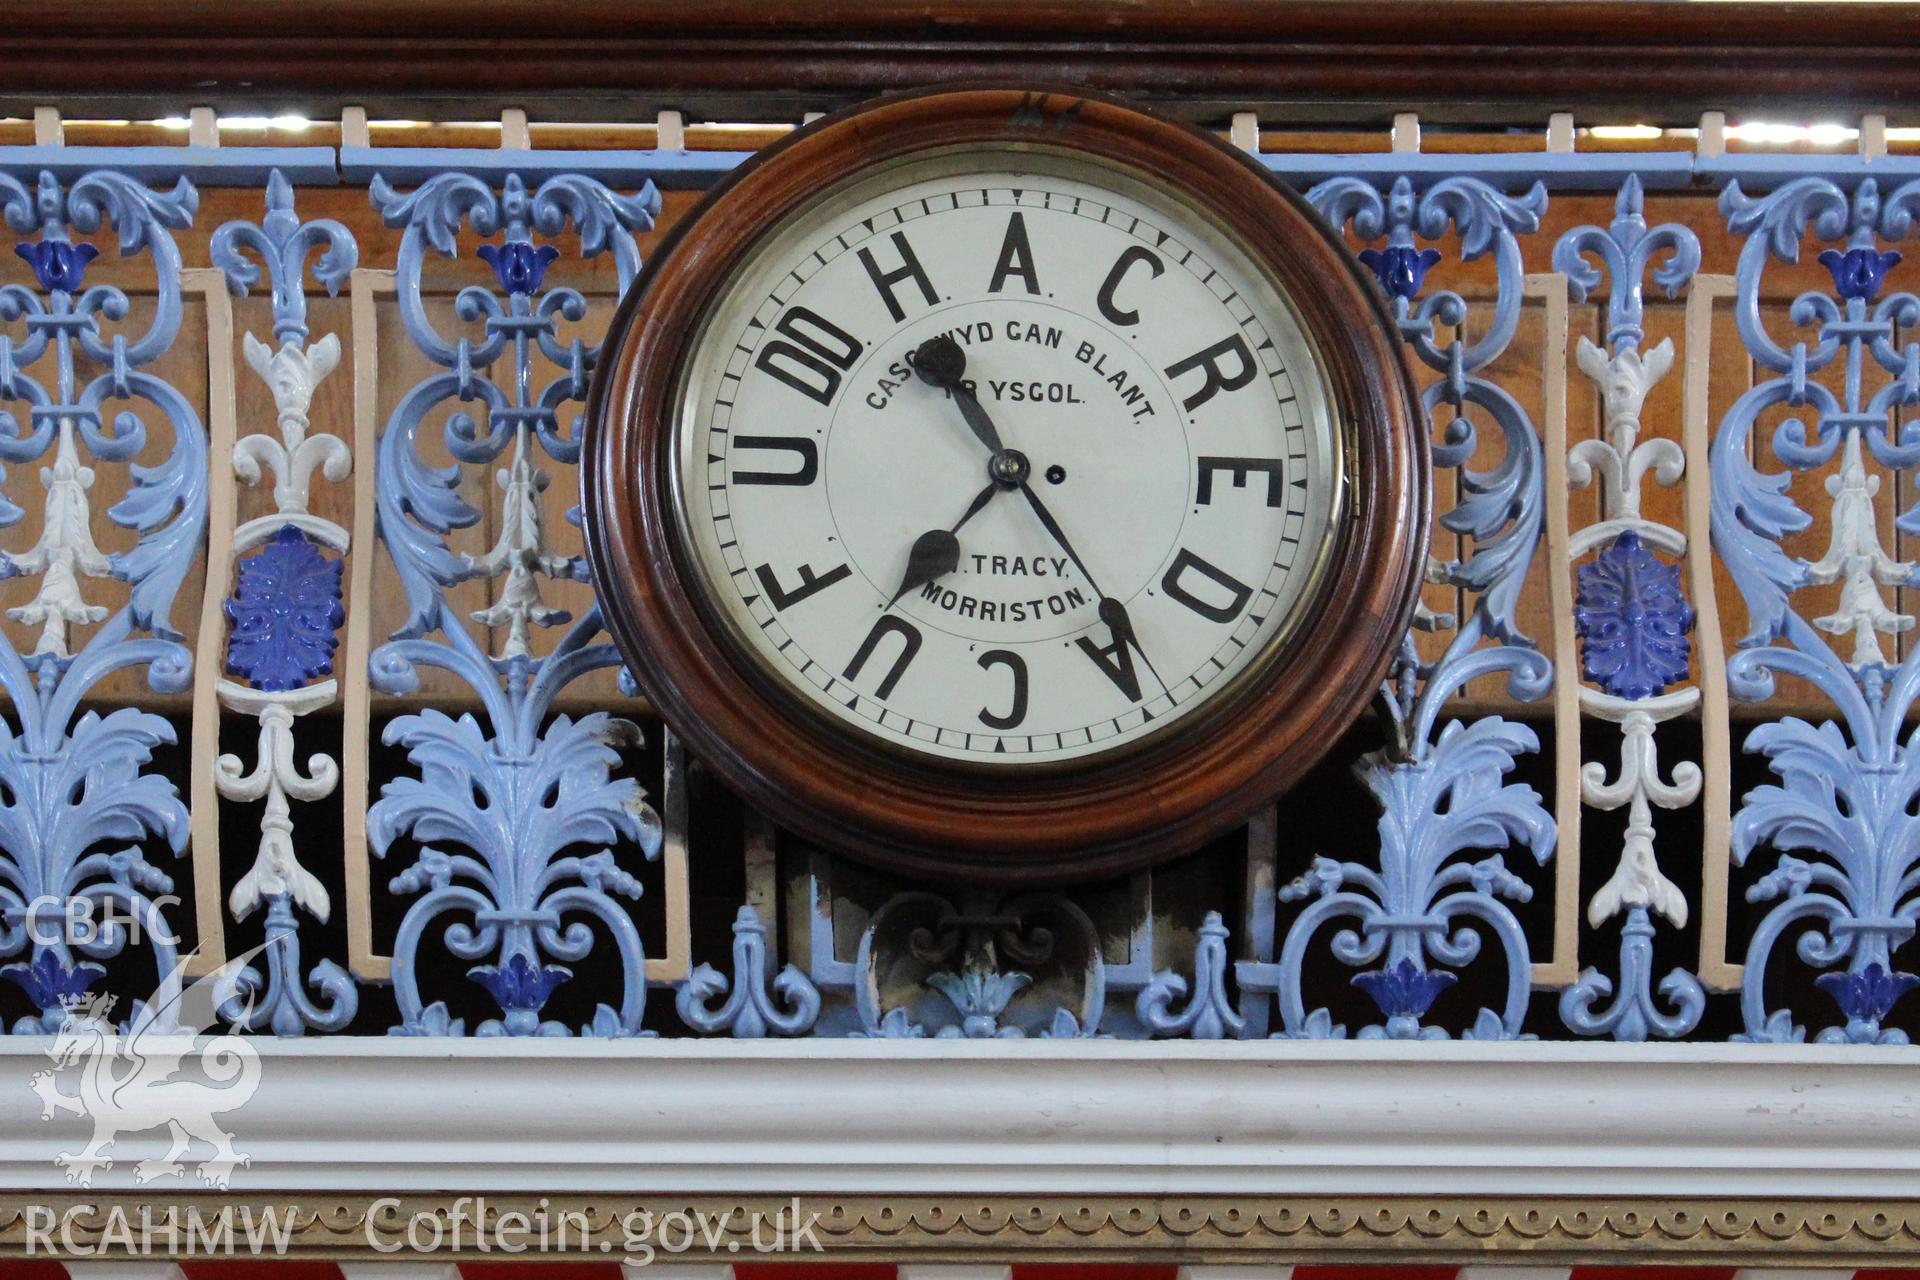 Clock funded by money raised from the Sunday School on first floor balcony railings. Photographic survey of Seion Welsh Baptist Chapel, Morriston, conducted by Sue Fielding.